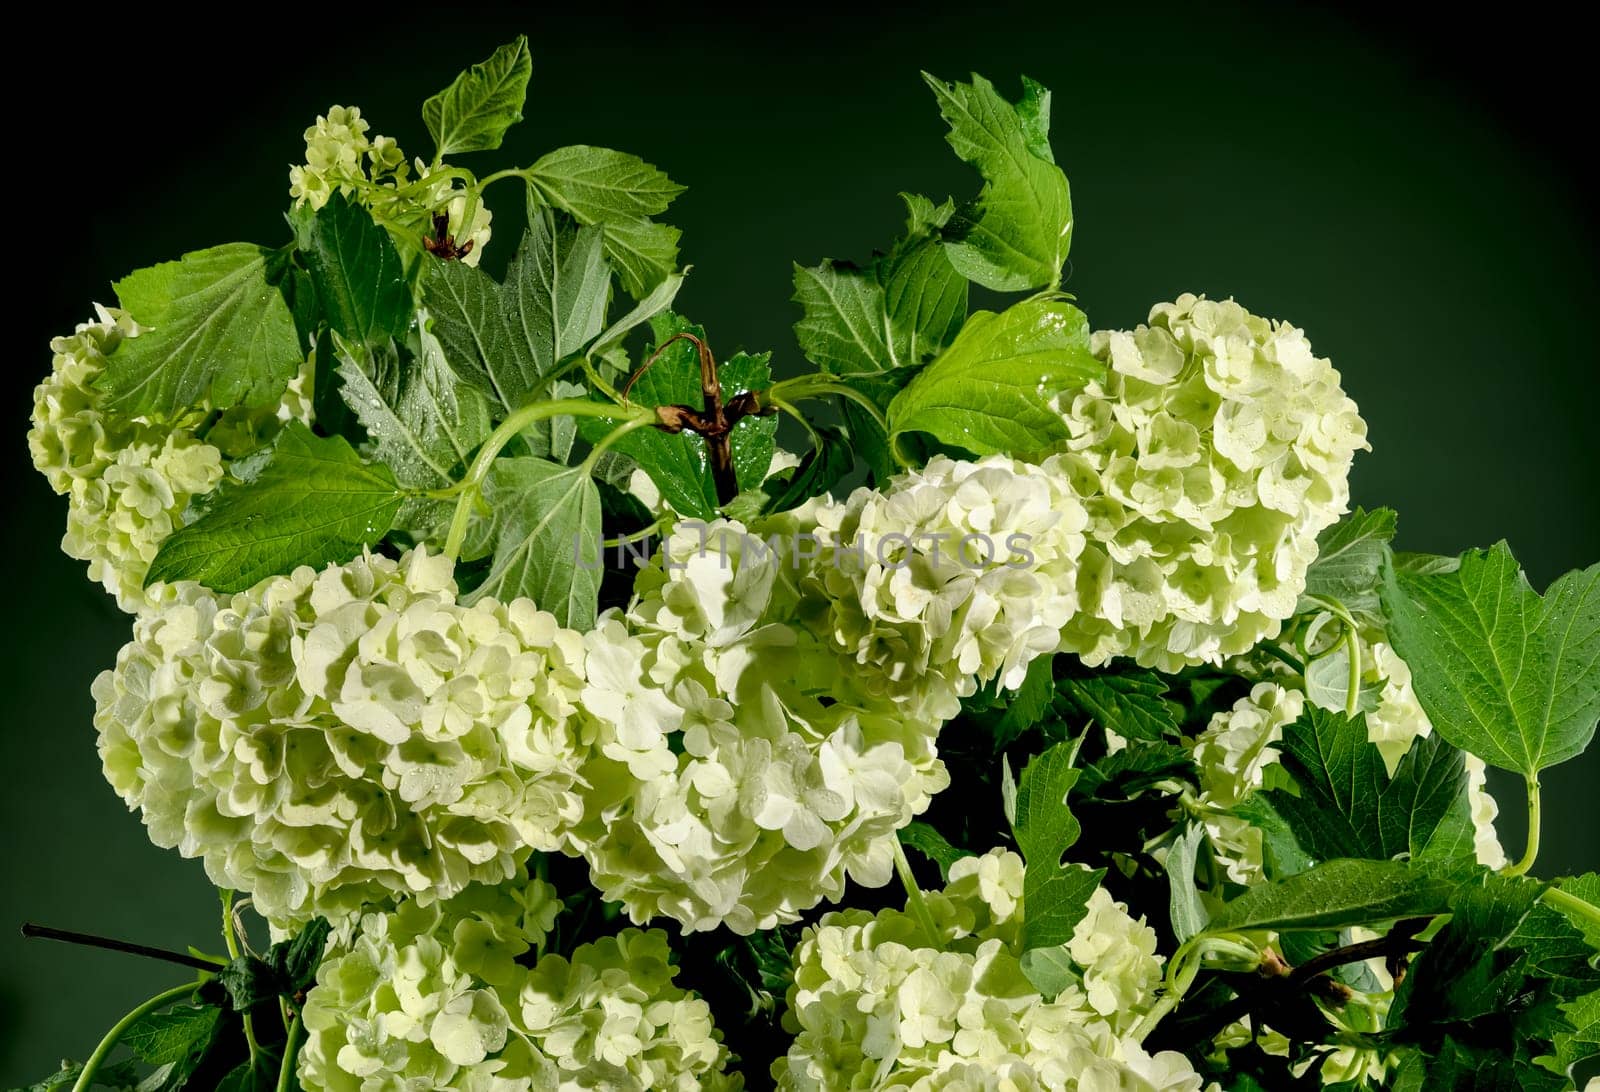 Beautiful Blooming white viburnum Chinese Snowball on a green background. Flower head close-up.